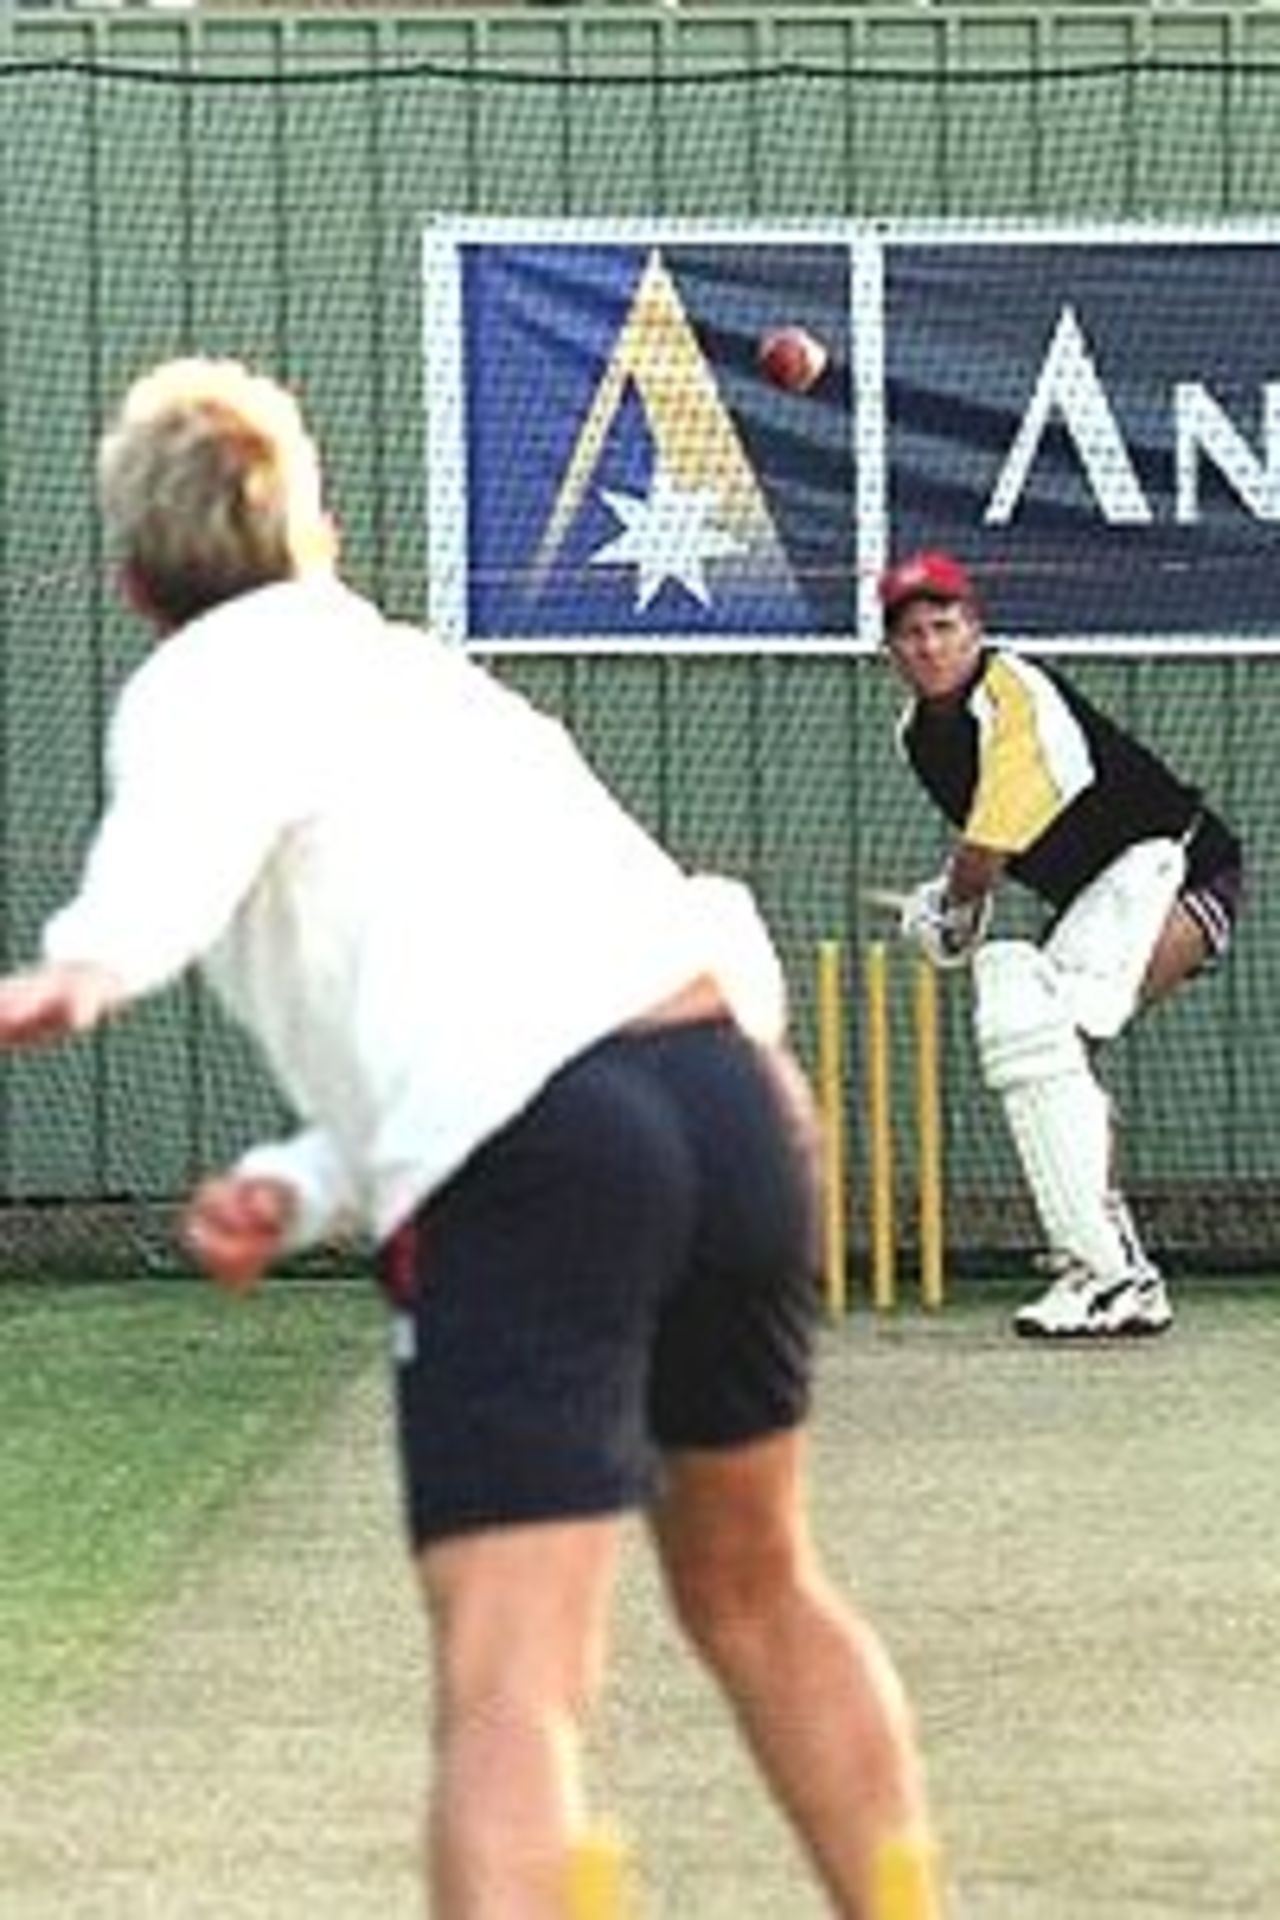 2 Dec 2000: Former Australian wicketkeeper Ian Healy returns to the nets for practice and is bowled to by Shane Warne ahead of the Ian Healy Testimonial game later in December after the second days play of the Second Test match between Australia and West Indies at the WACA Cricket Ground, Perth, Australia.